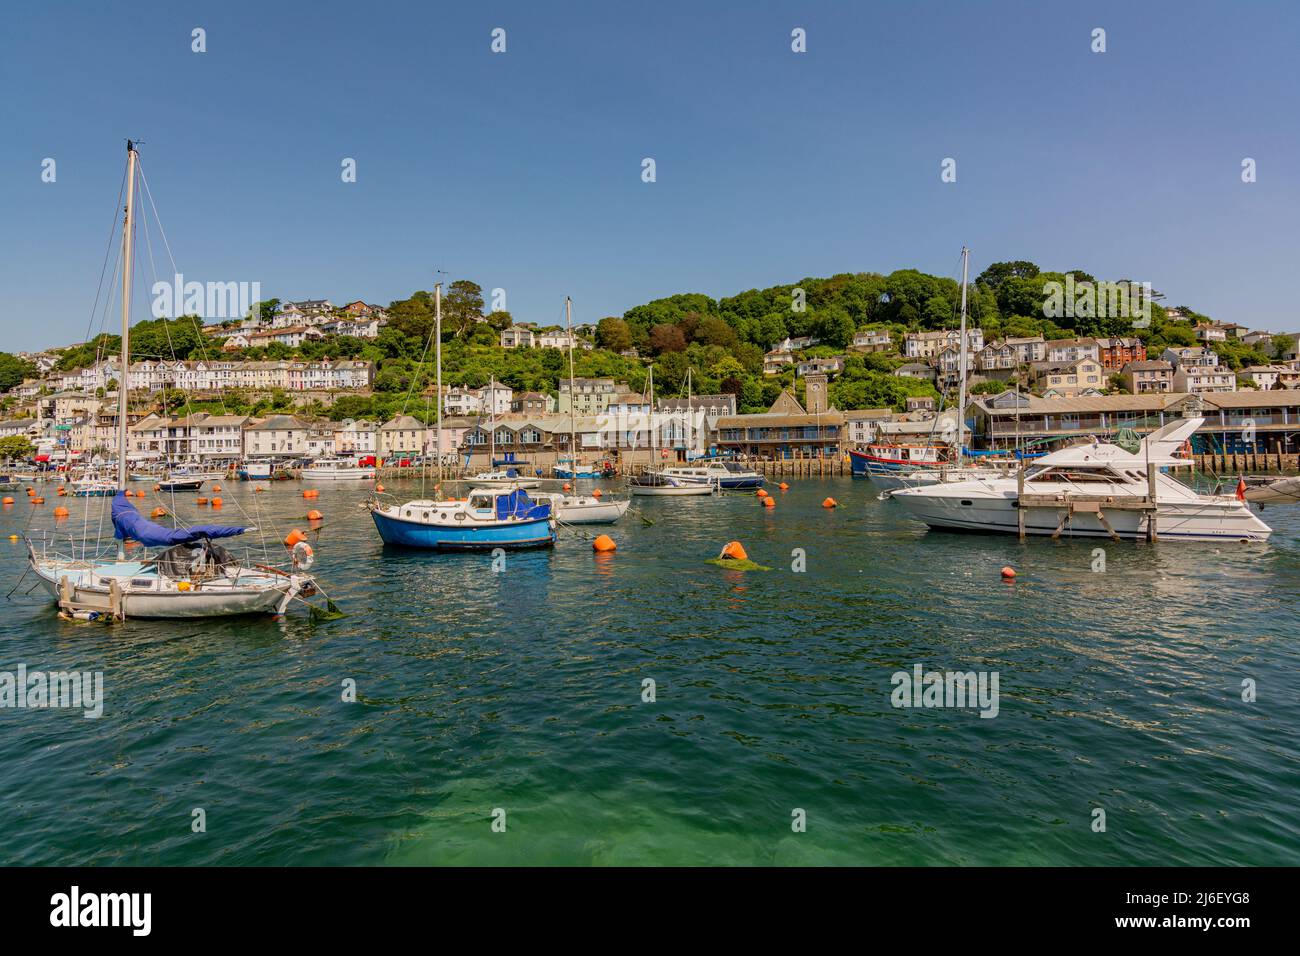 Looking over the East Looe River at high tide to East Looe and its hillside buildings and waterfront, on a hot July day - Looe, Cornwall, UK. Stock Photo